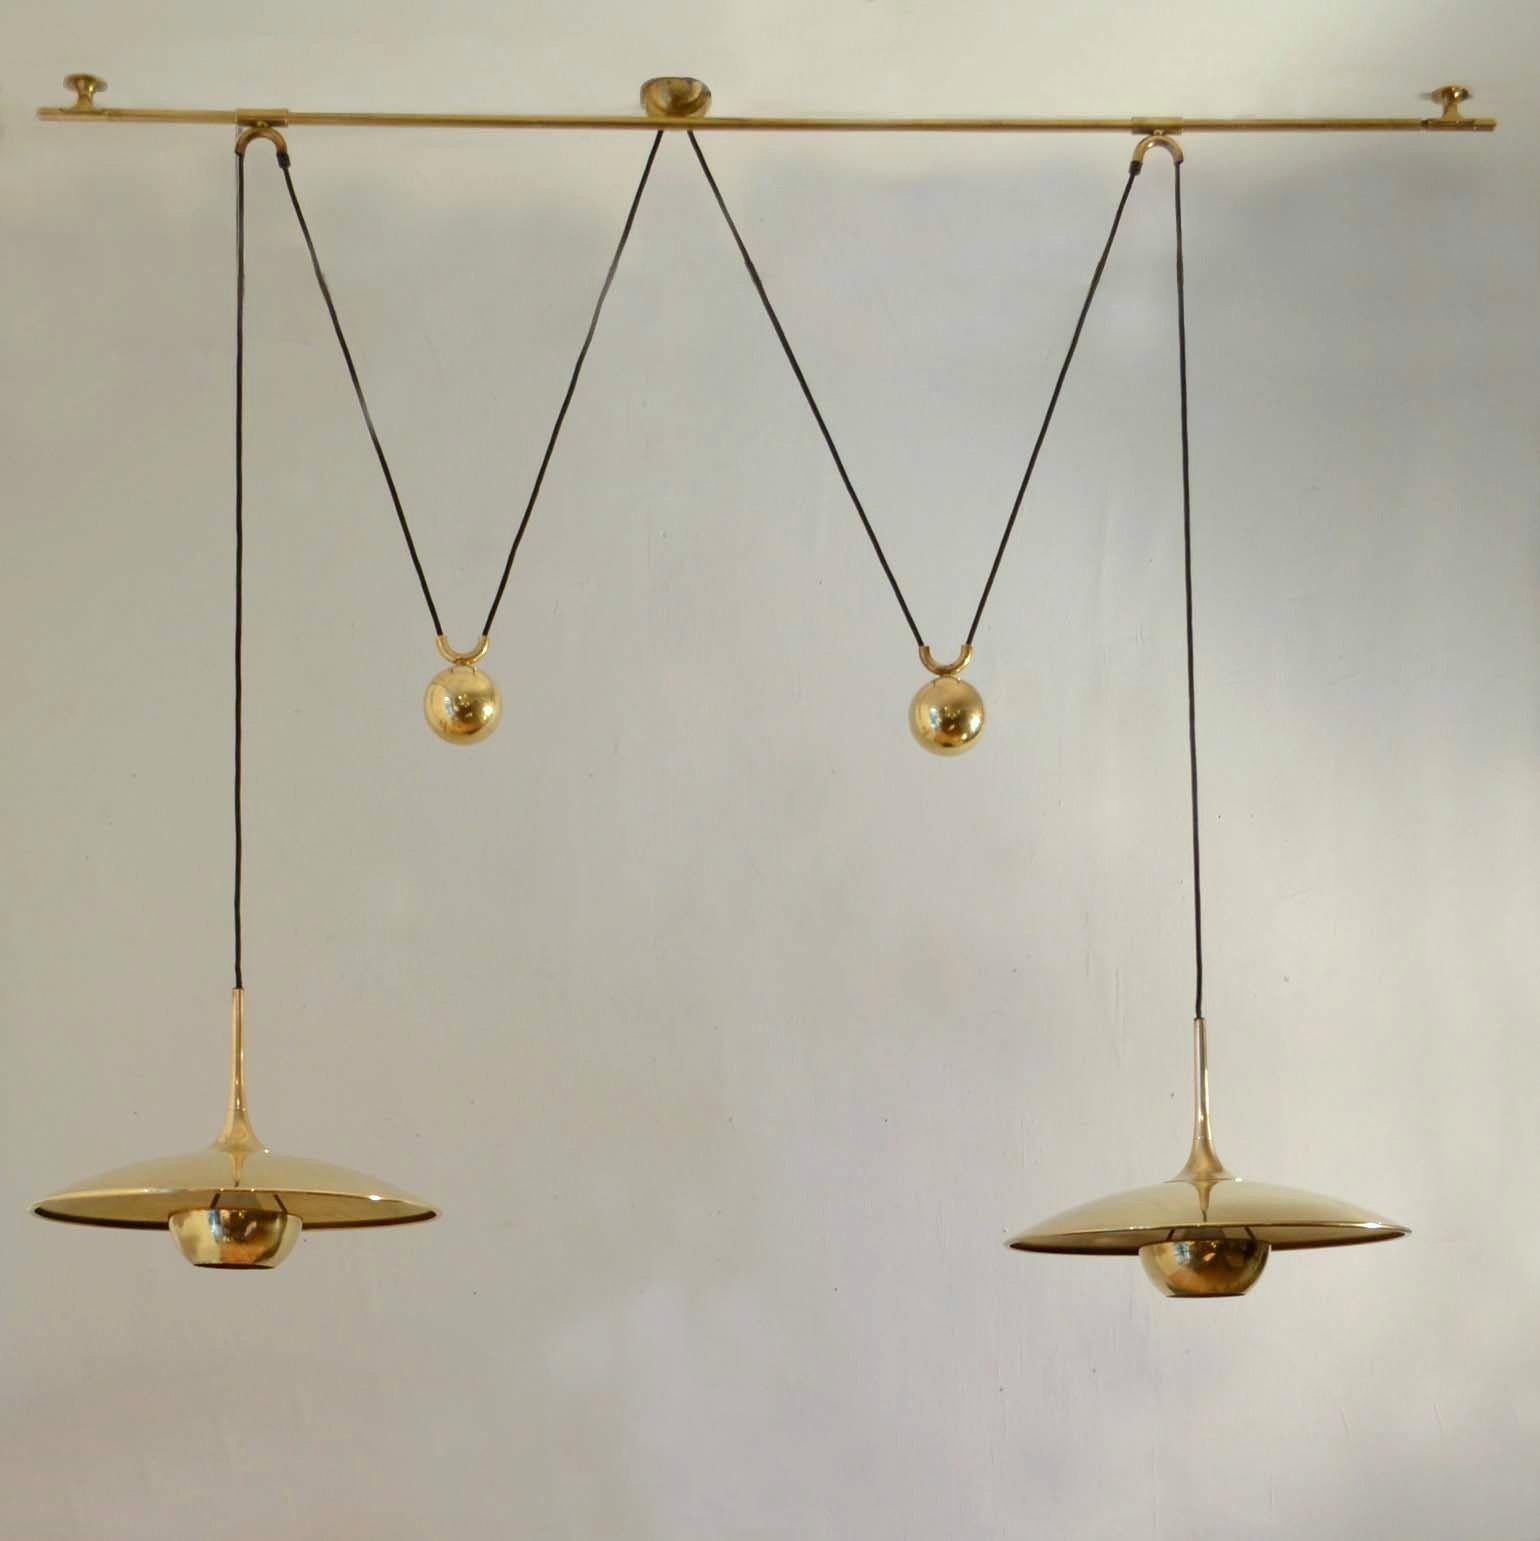 German Double Counterbalance Pendant Lamps Onos 40 in Brass by Florian Schulz, 1970s